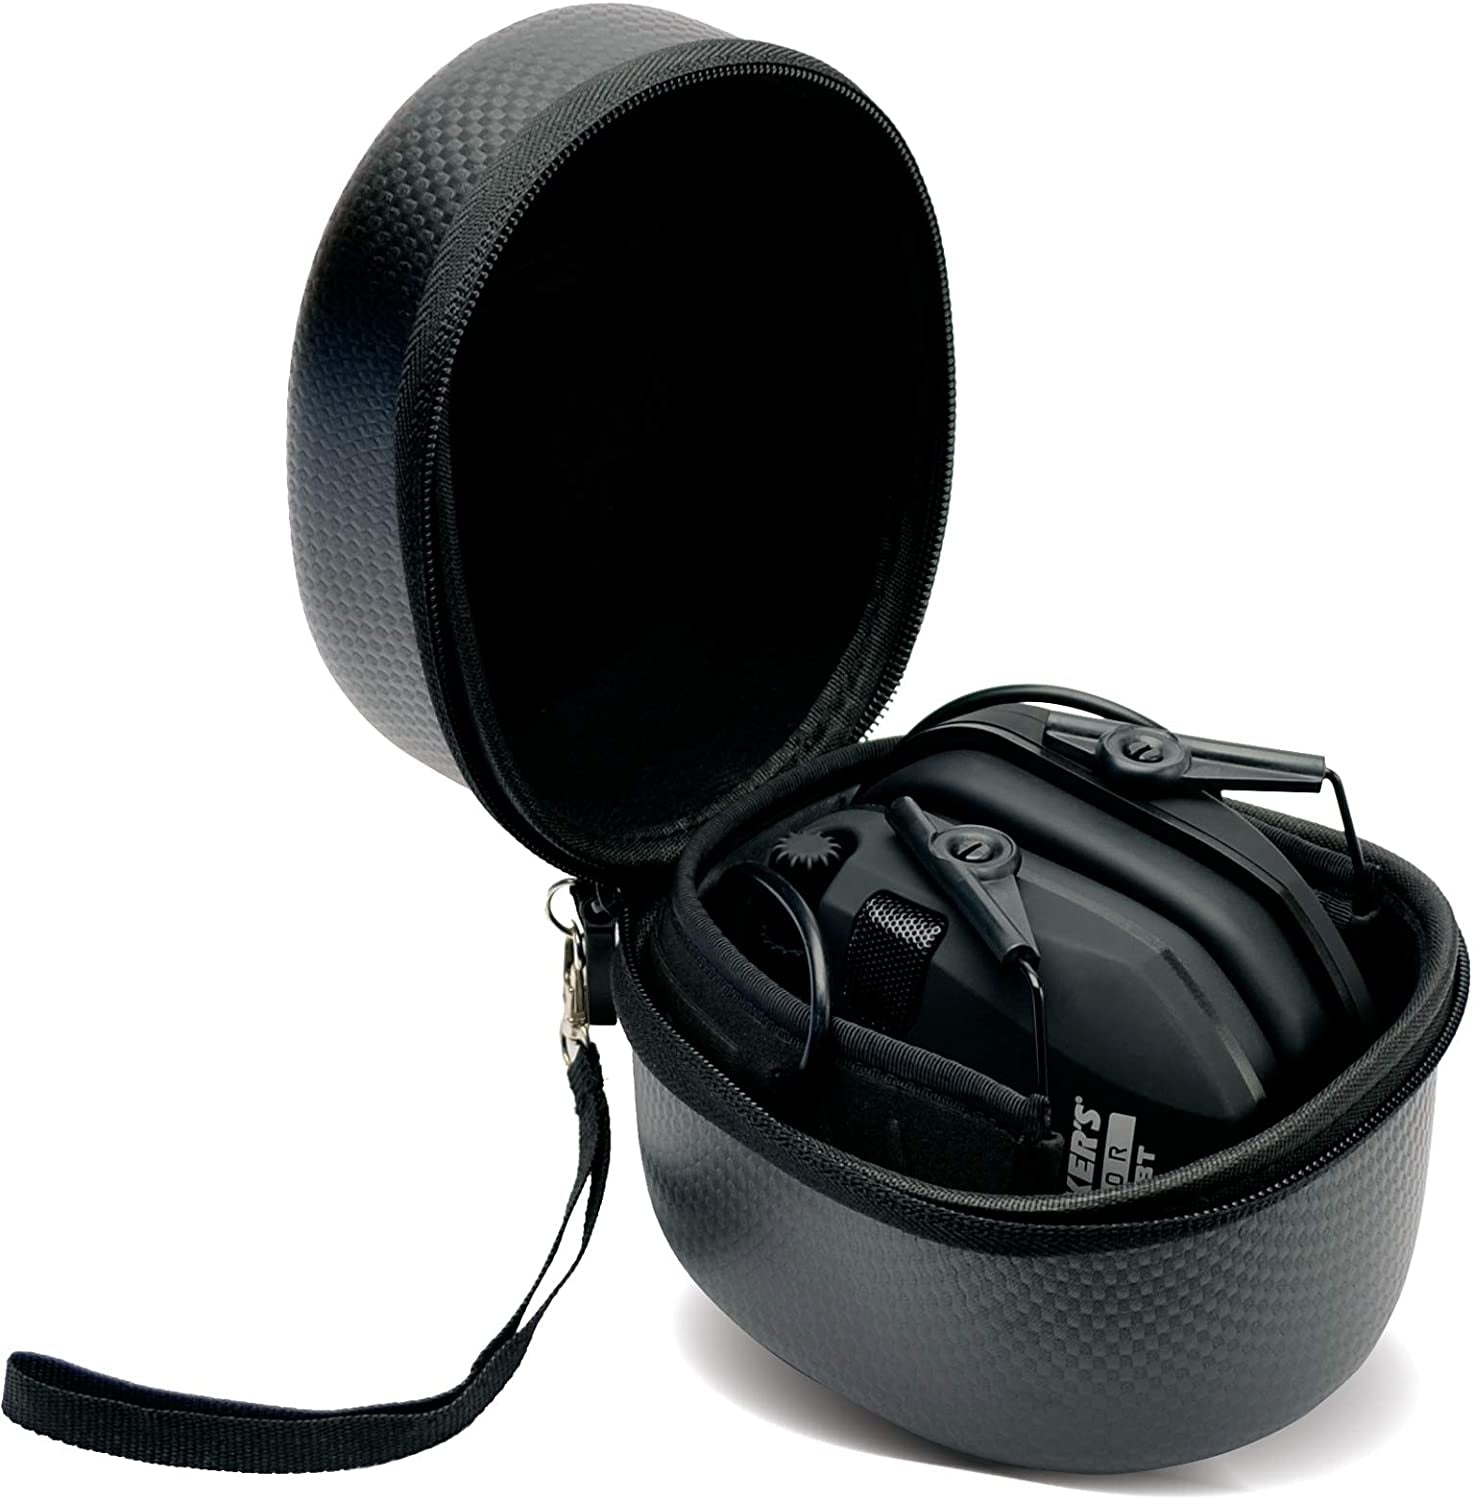 Razor Slim Electronic Shooting Hearing Protection Muff (Sound Amplification and Suppression) with Protective Case